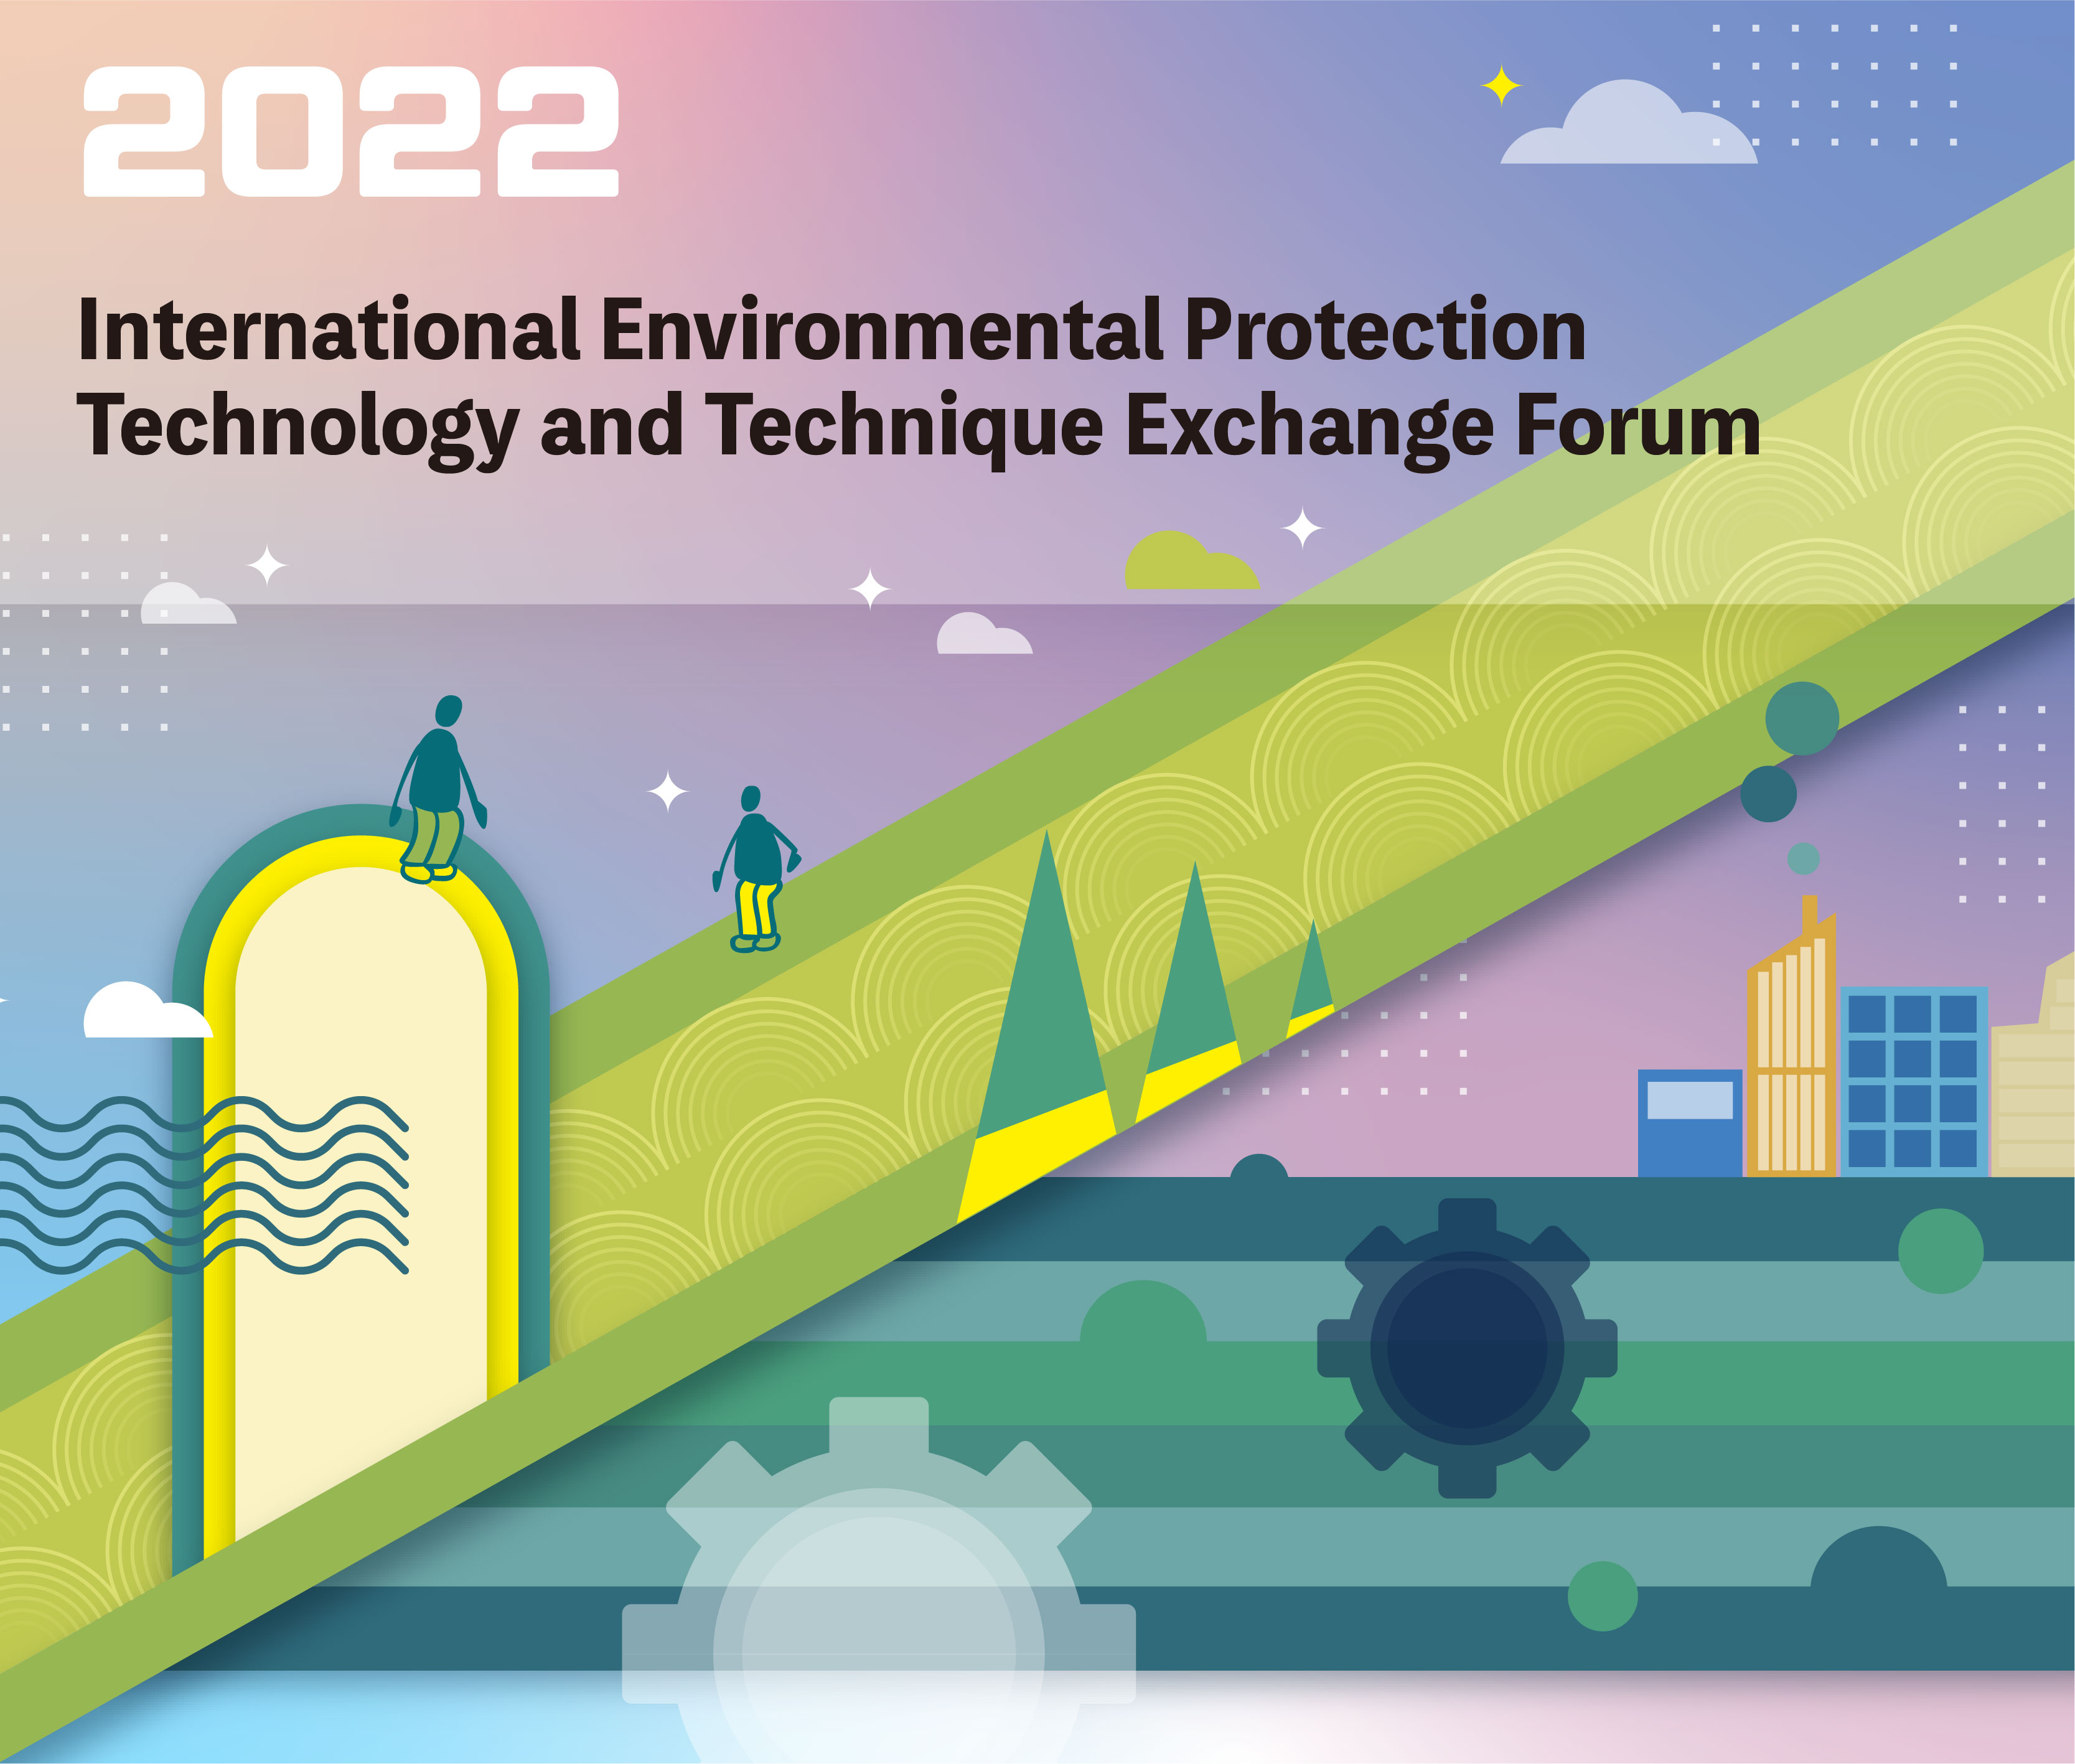 2022 International Environmental Protection Technology and Technique Exchange Forum